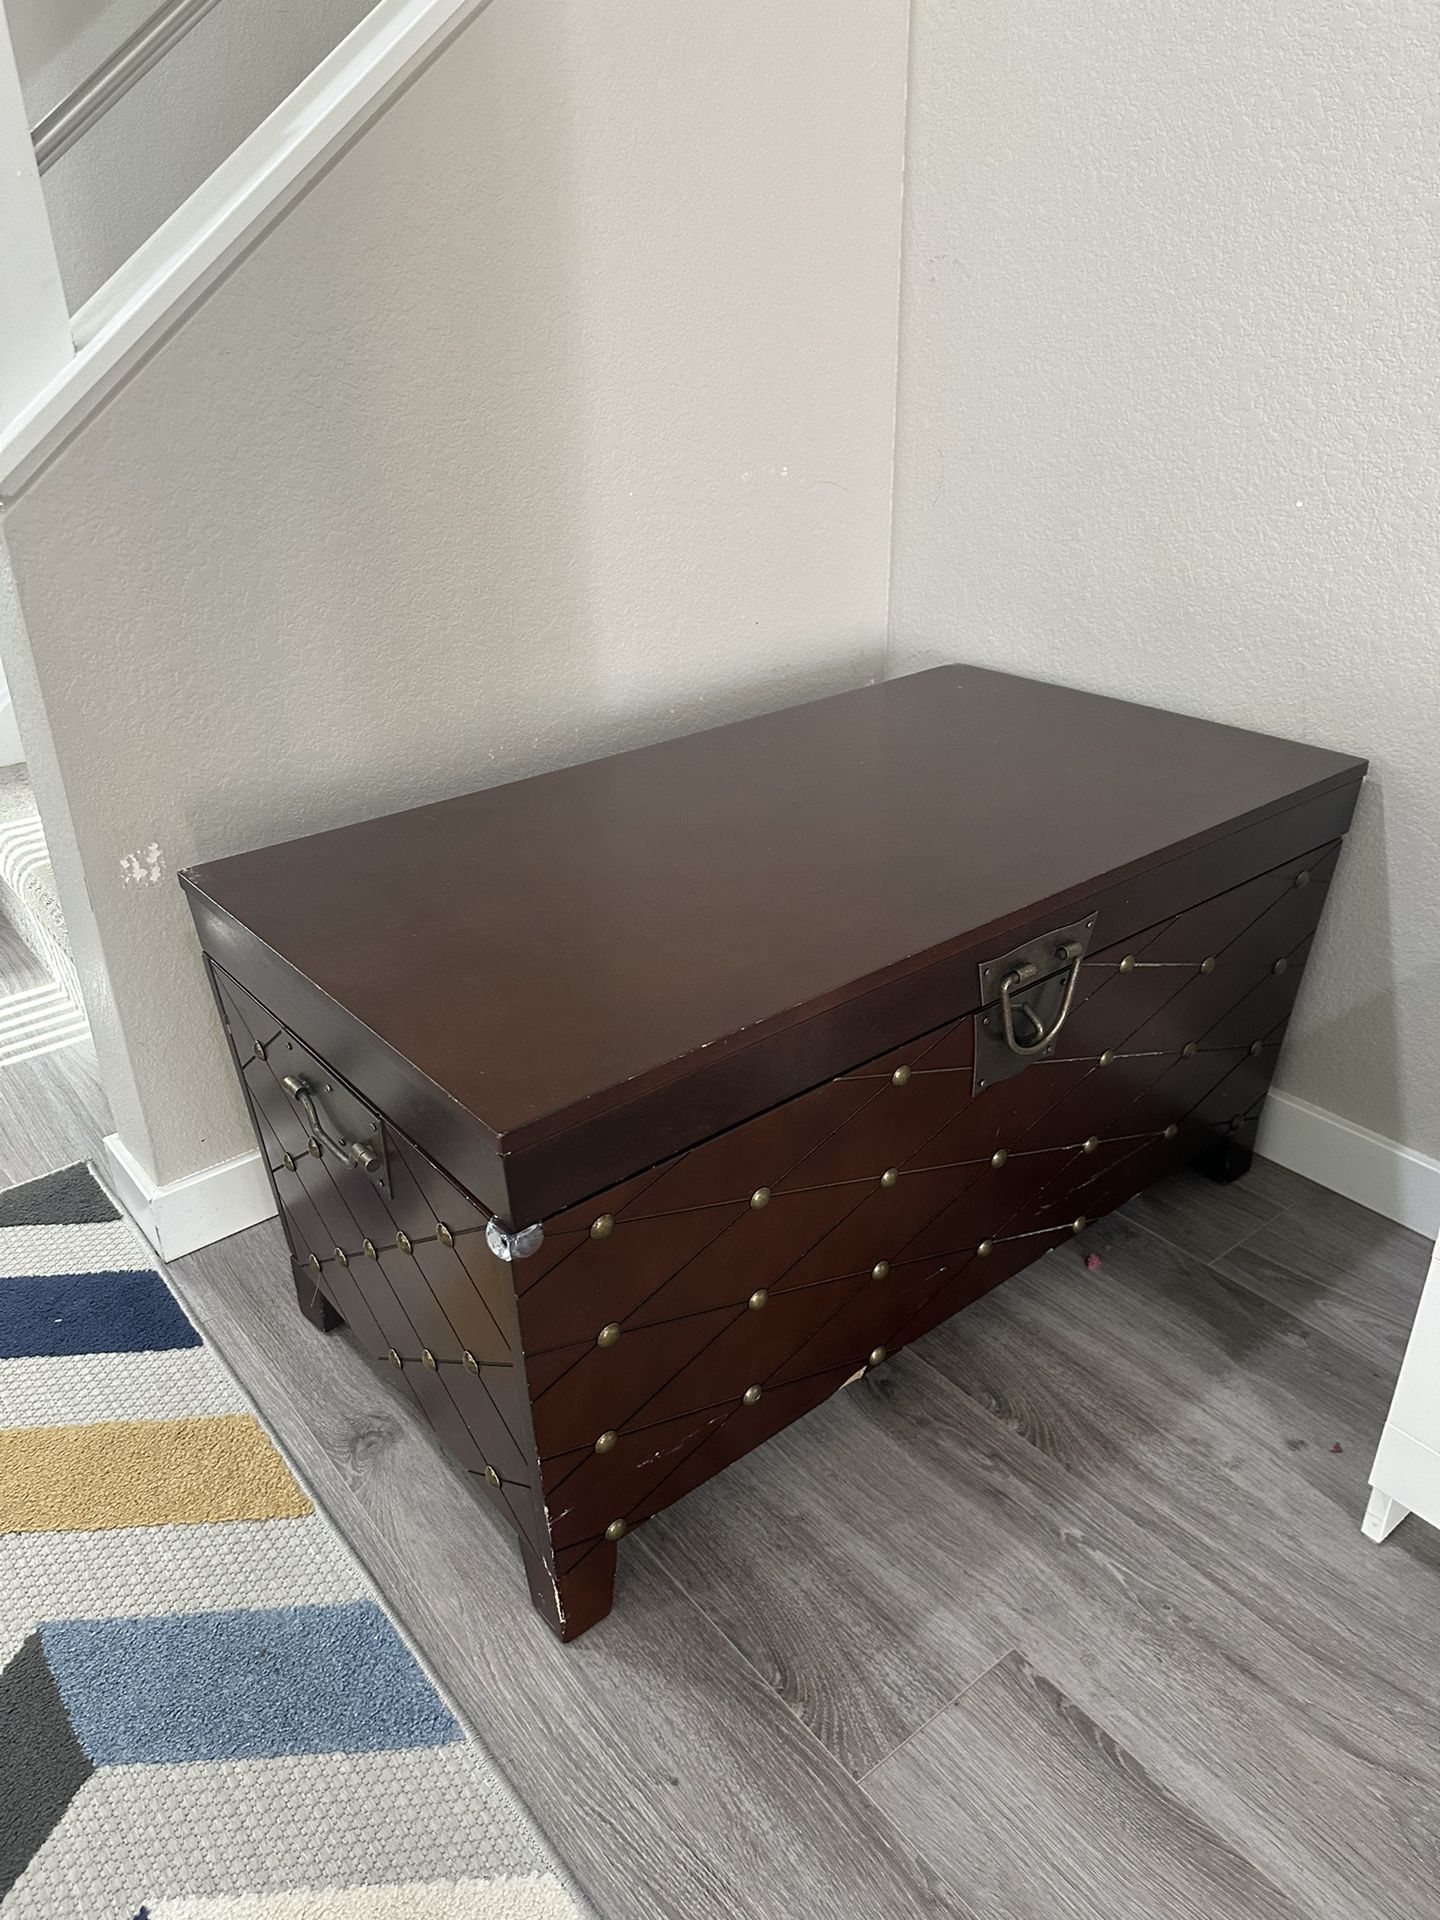 Decorative Trunk Coffee Table With Storage